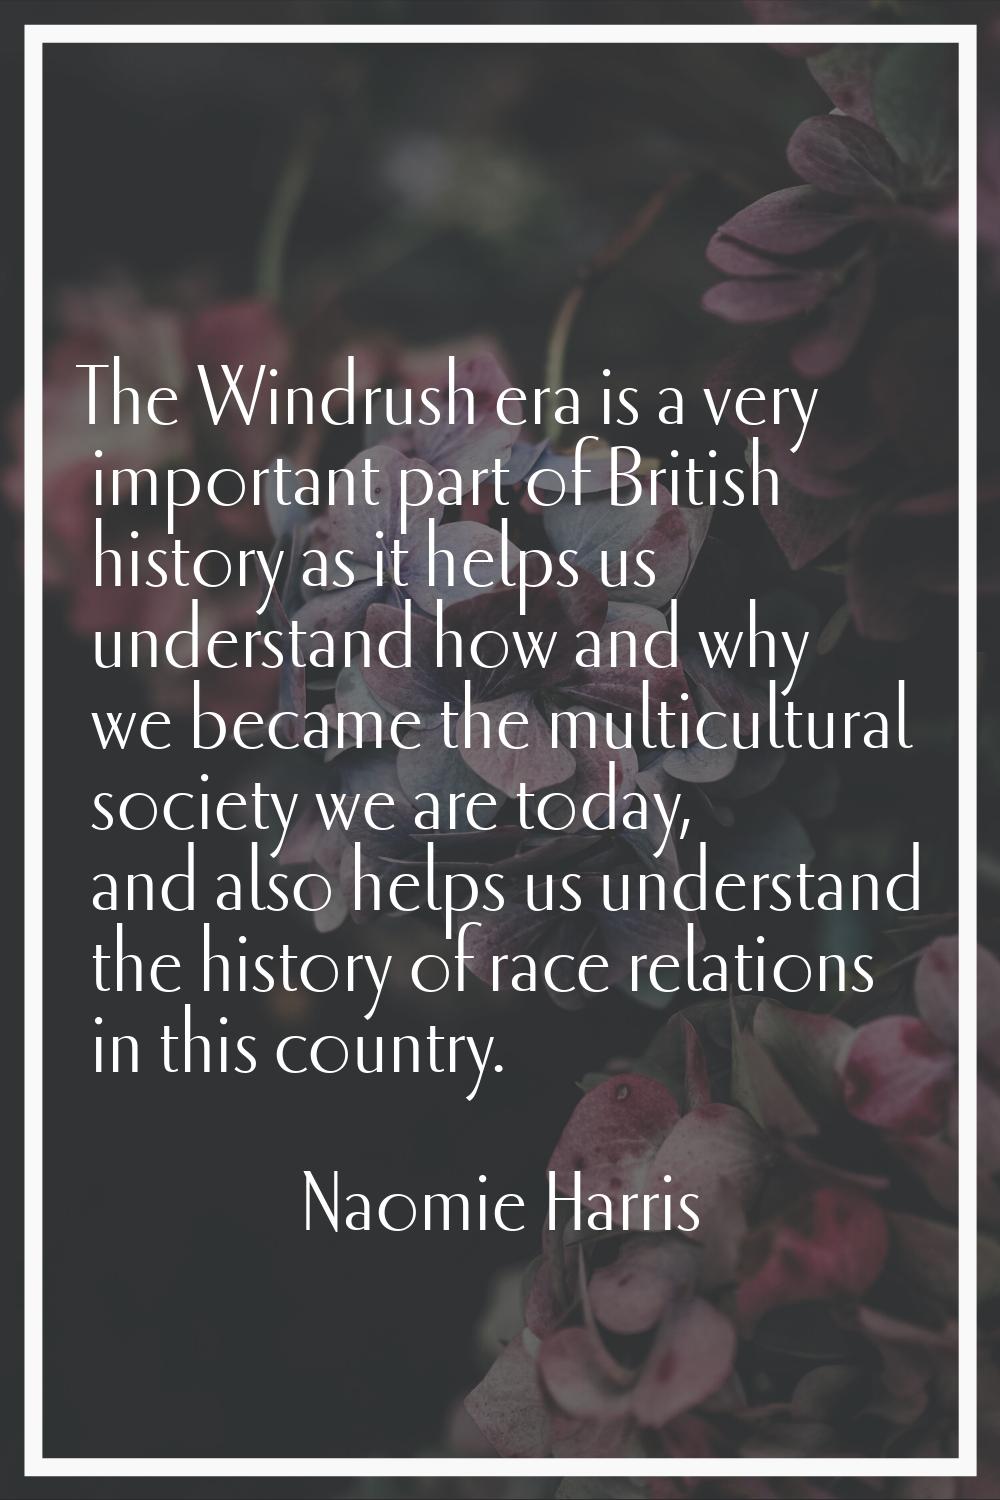 The Windrush era is a very important part of British history as it helps us understand how and why 